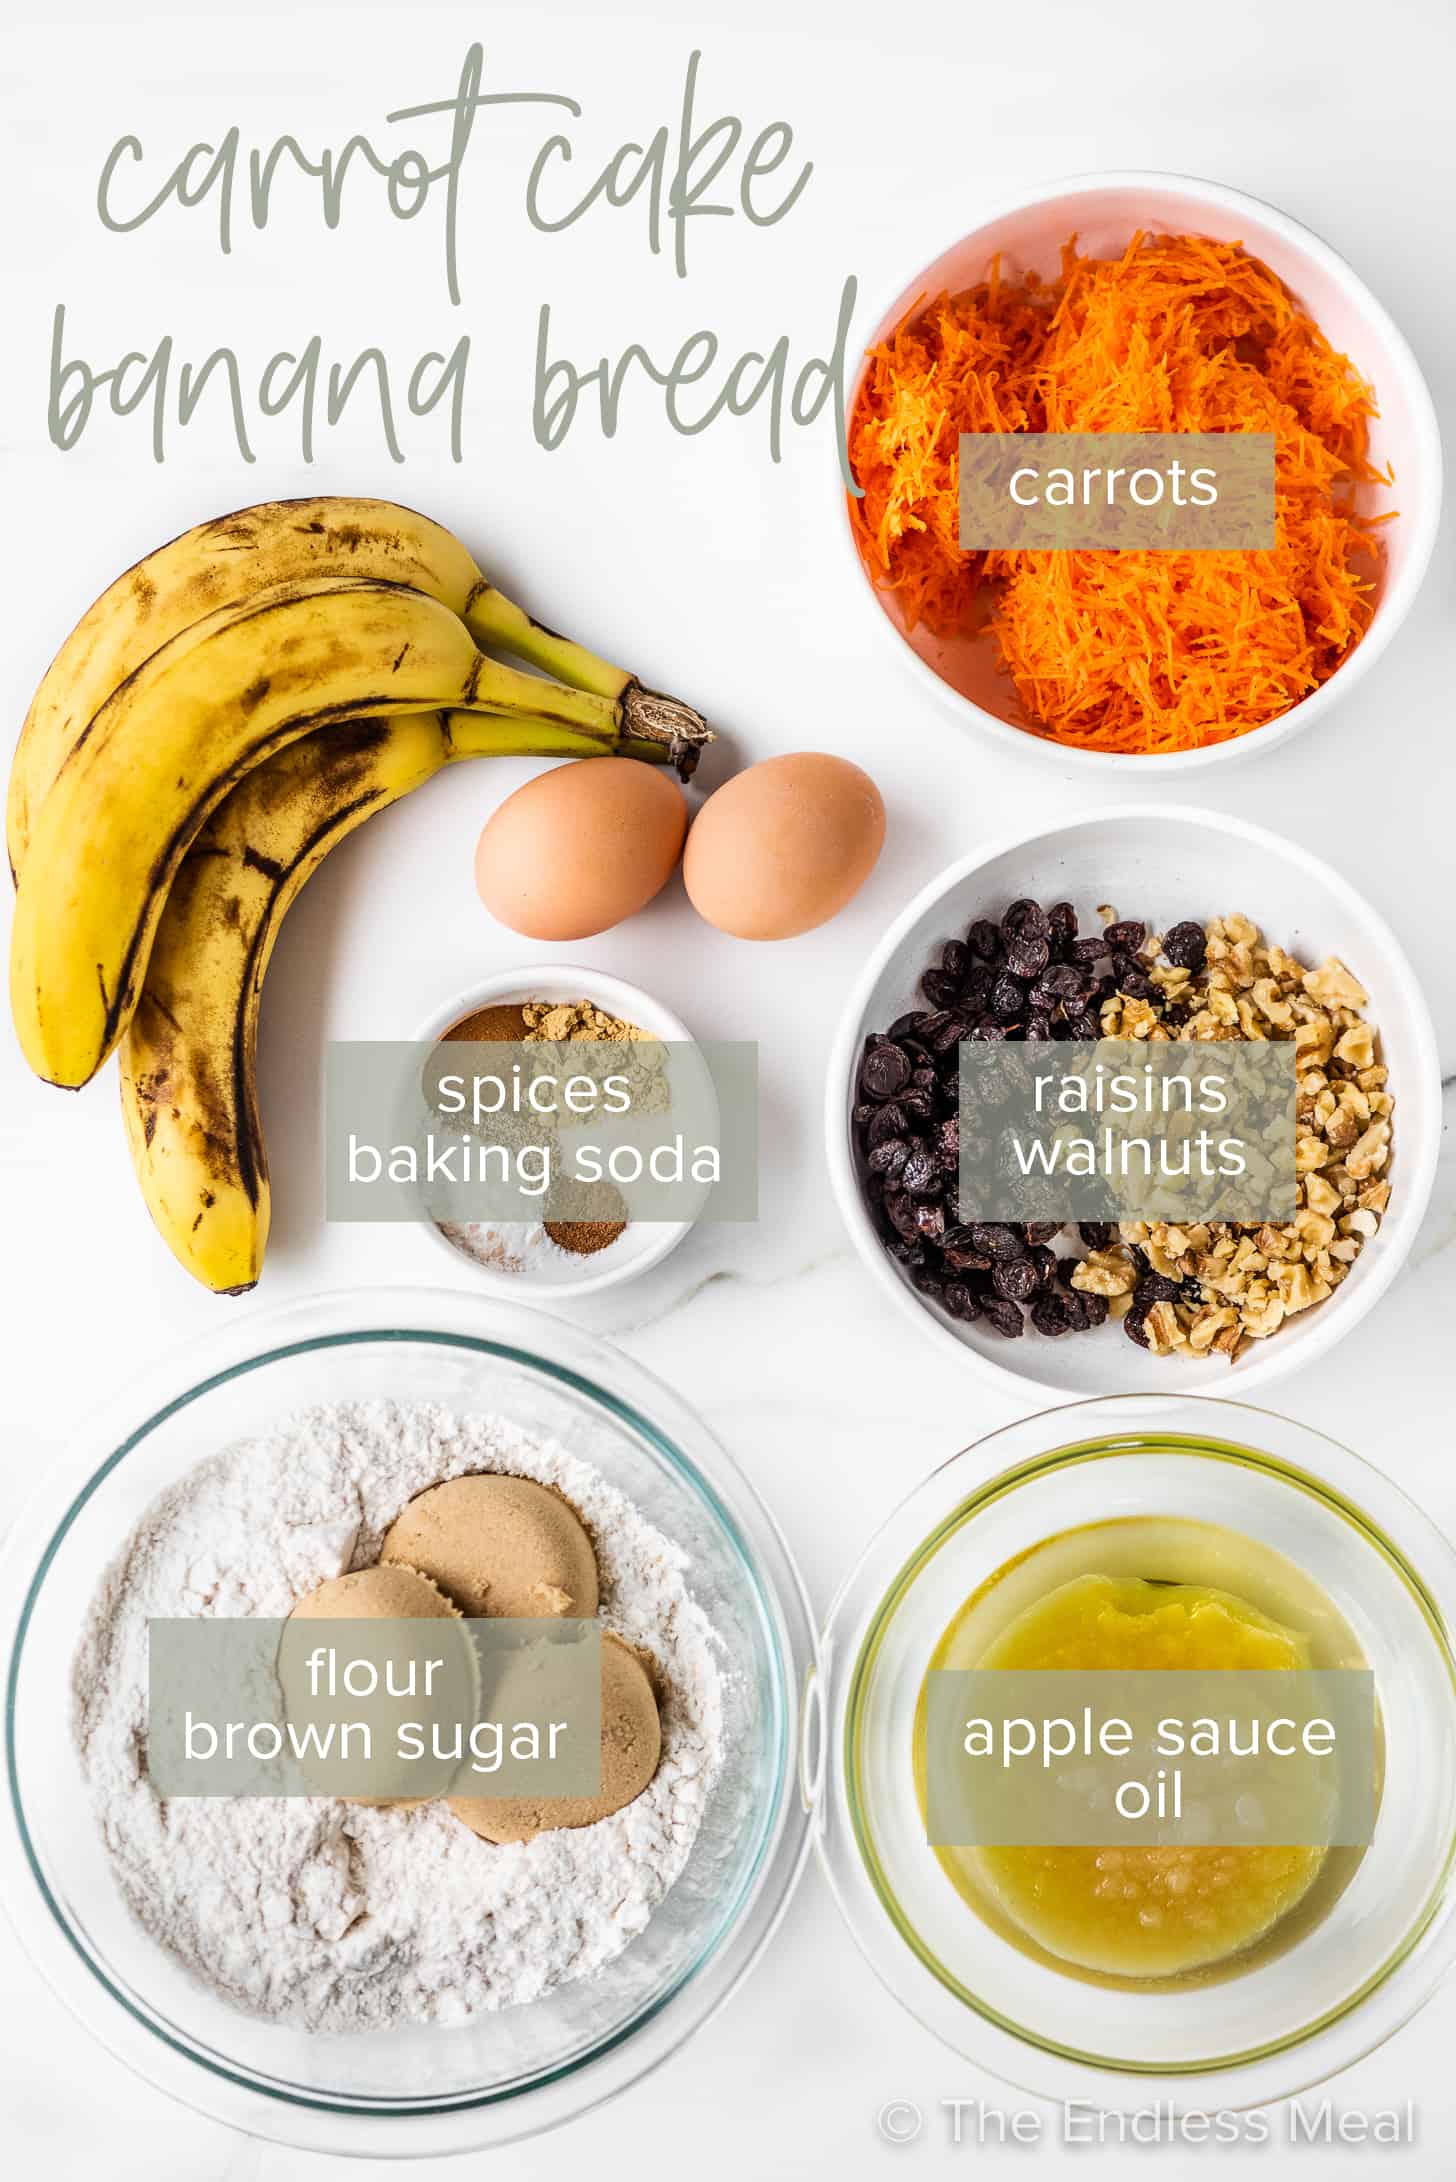 the ingredients to make carrot cake banana bread.